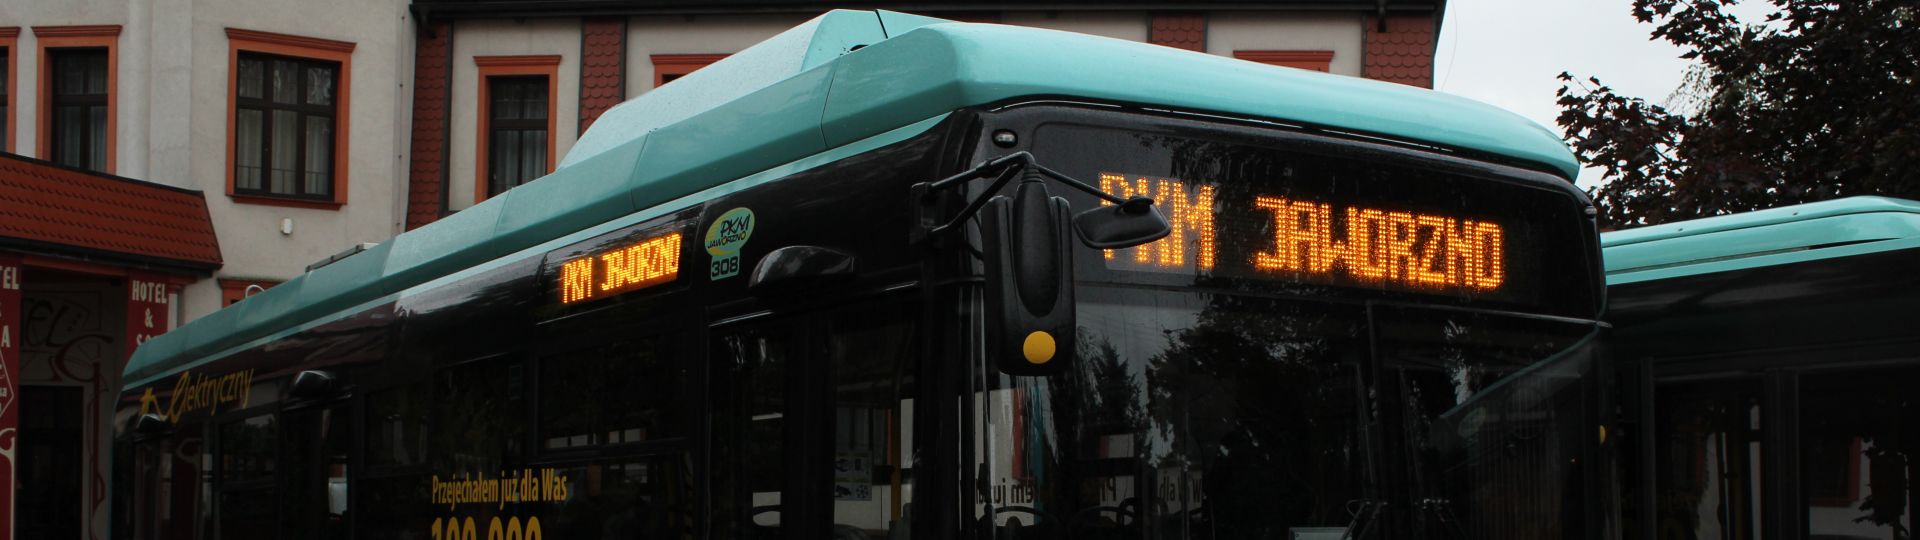 Solaris obtains orders for 42 electric buses  from its domestic market